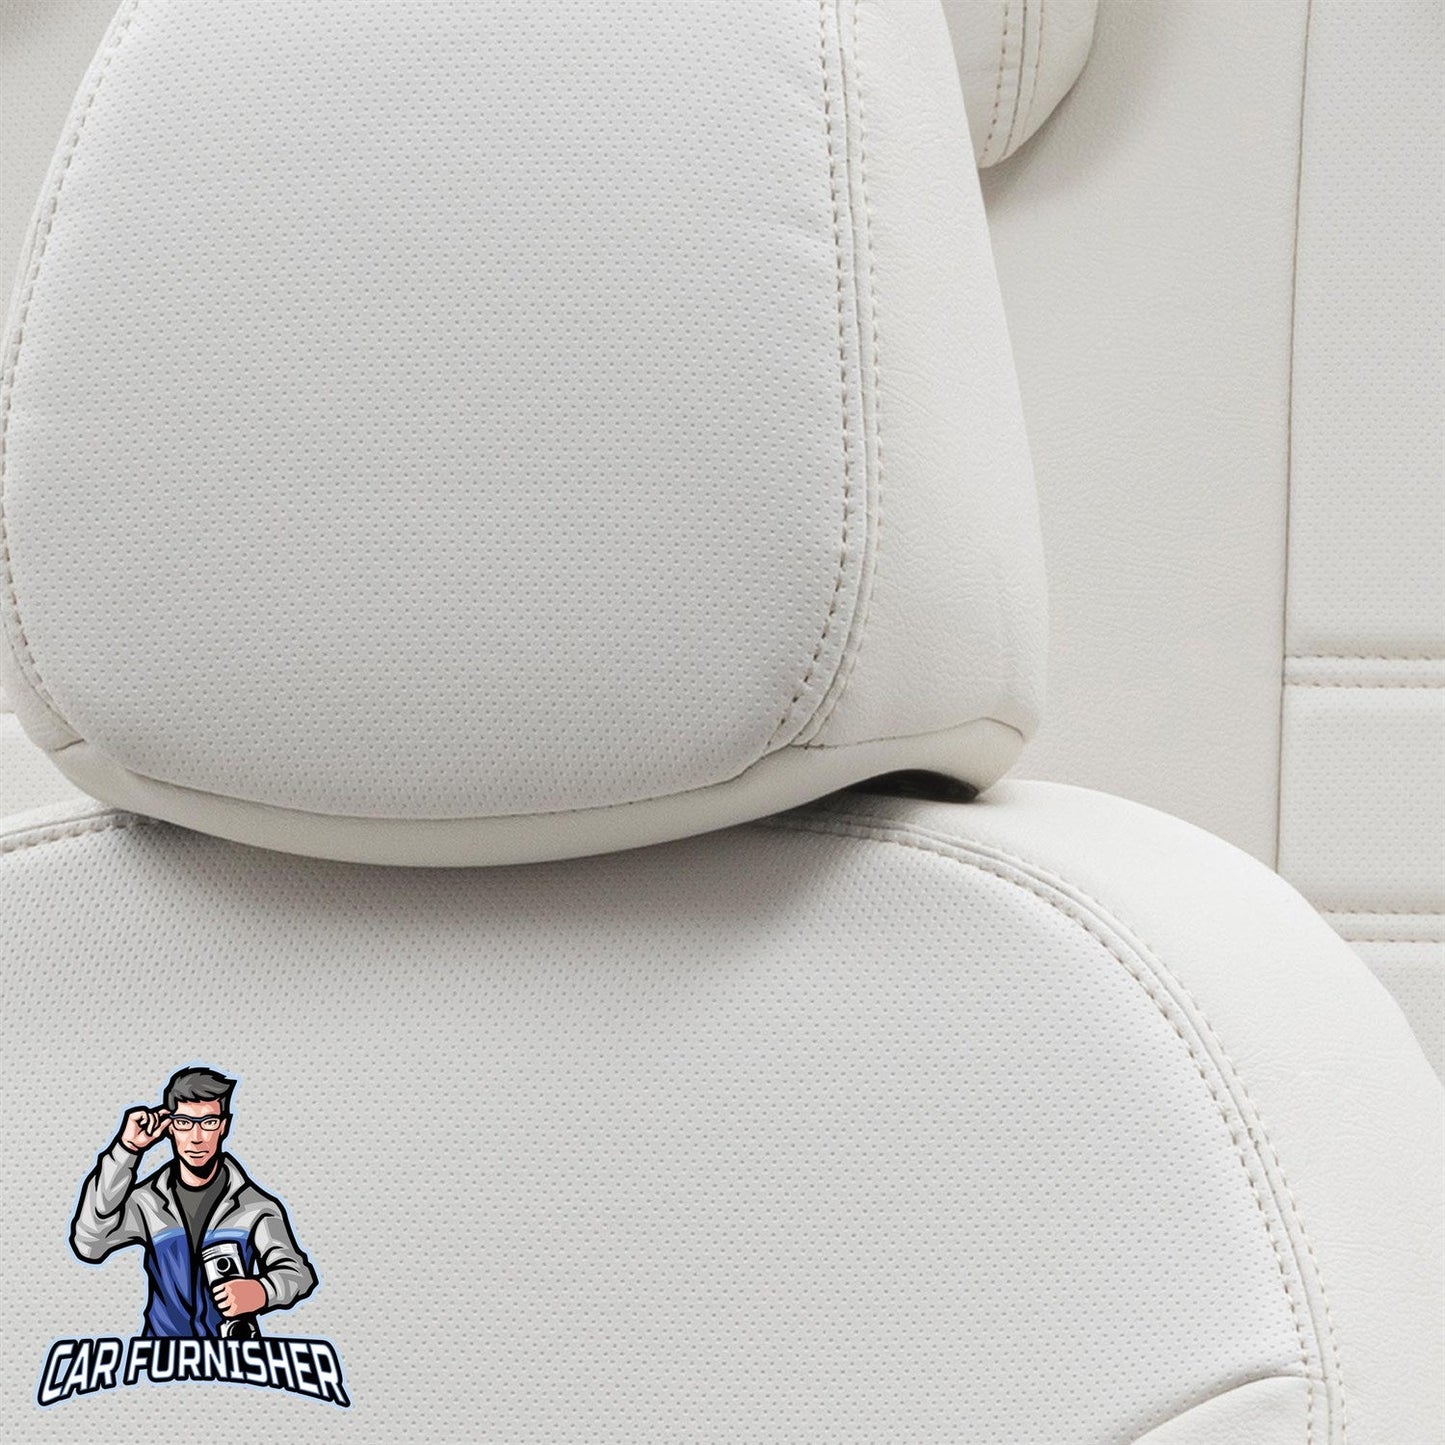 Landrover Freelander Car Seat Covers 1998-2012 Istanbul Design Ivory Leather